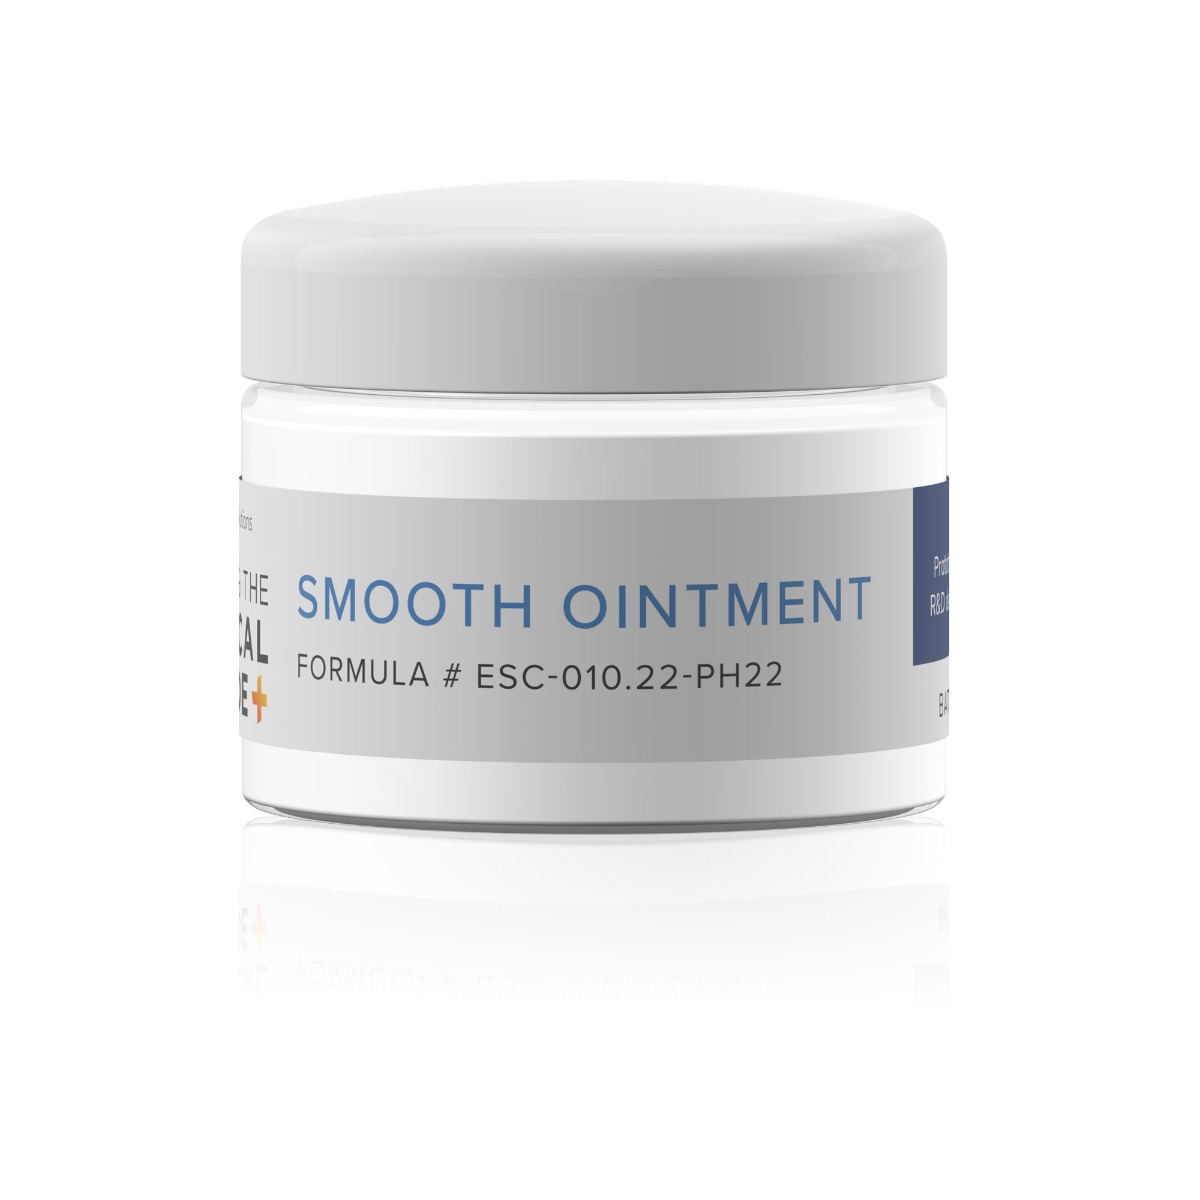 A pot of smooth ointment